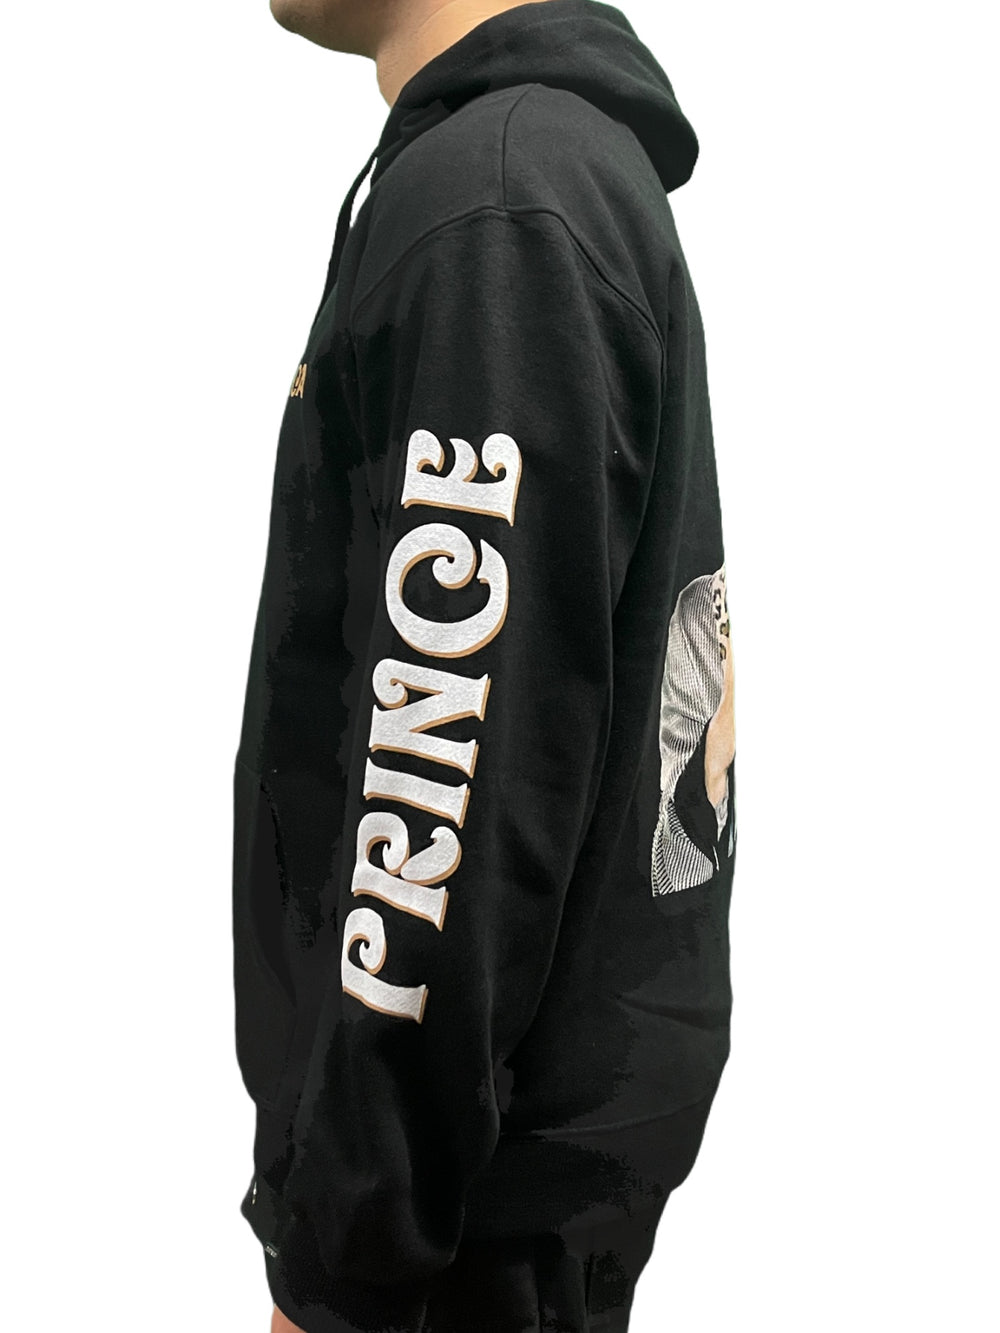 Prince – Welcome 2 America Unisex Official Hoodie Printed Front Back & Arm NEW